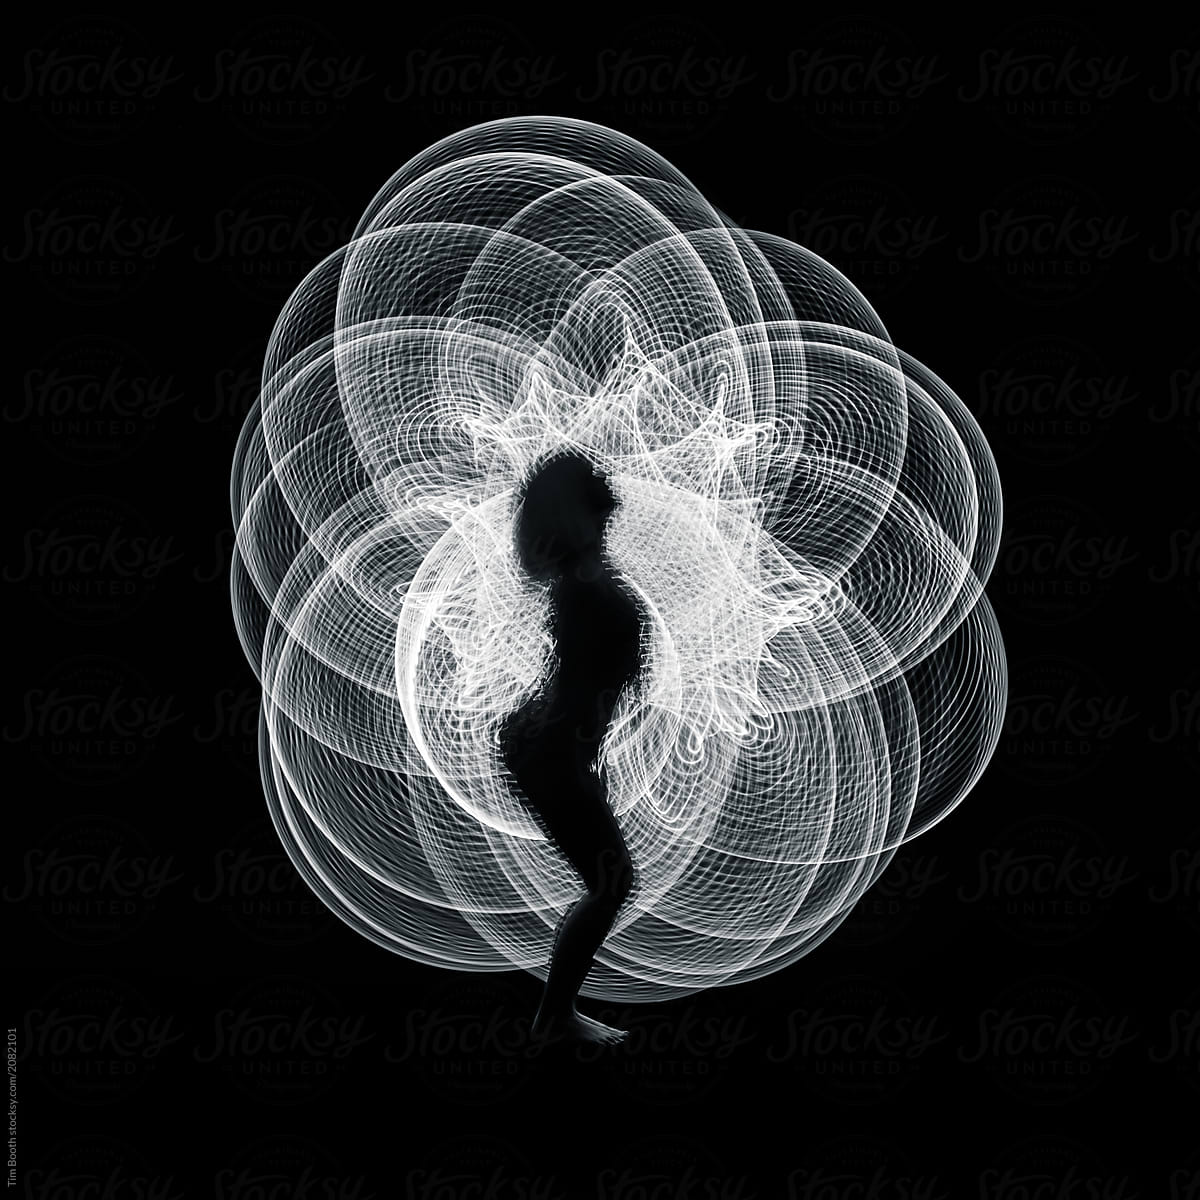 Silhouette of a girl in front of a spiral of light